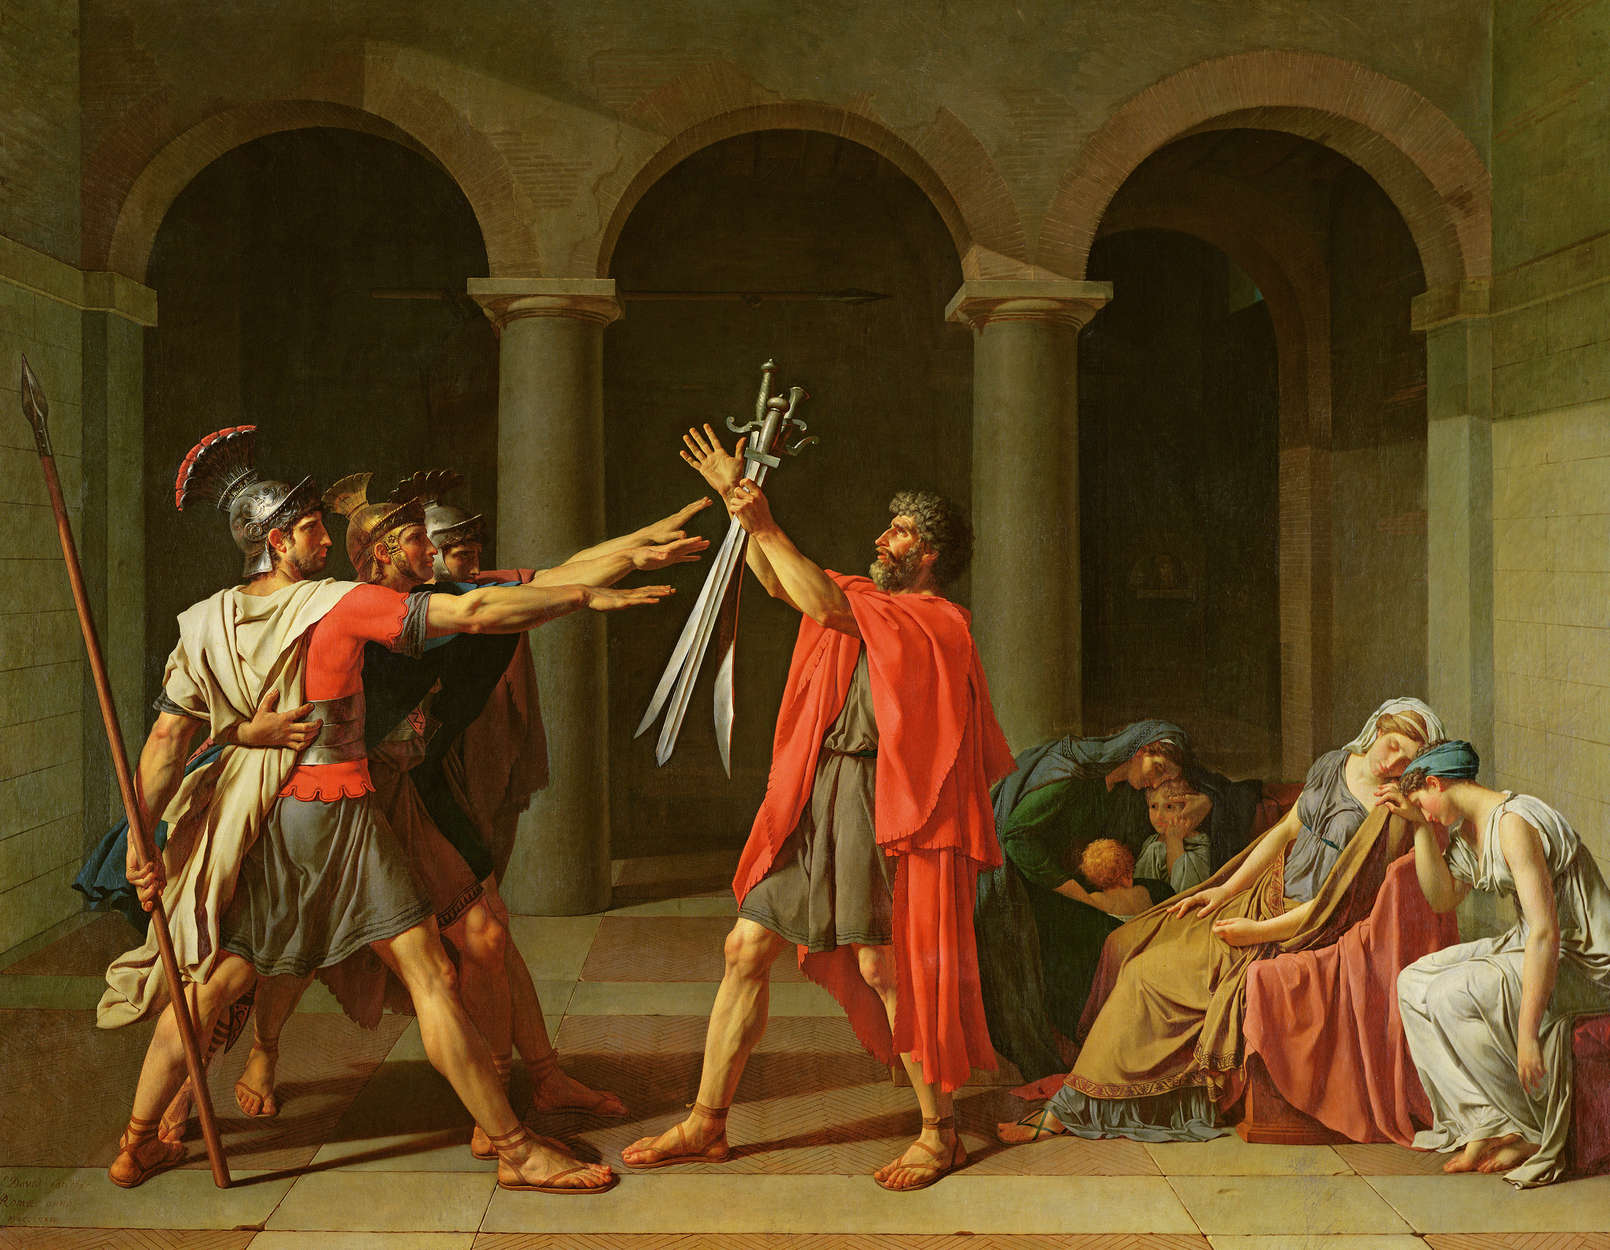             Photo wallpaper "The Oath of the Horatii" by Jaques-Louis David
        